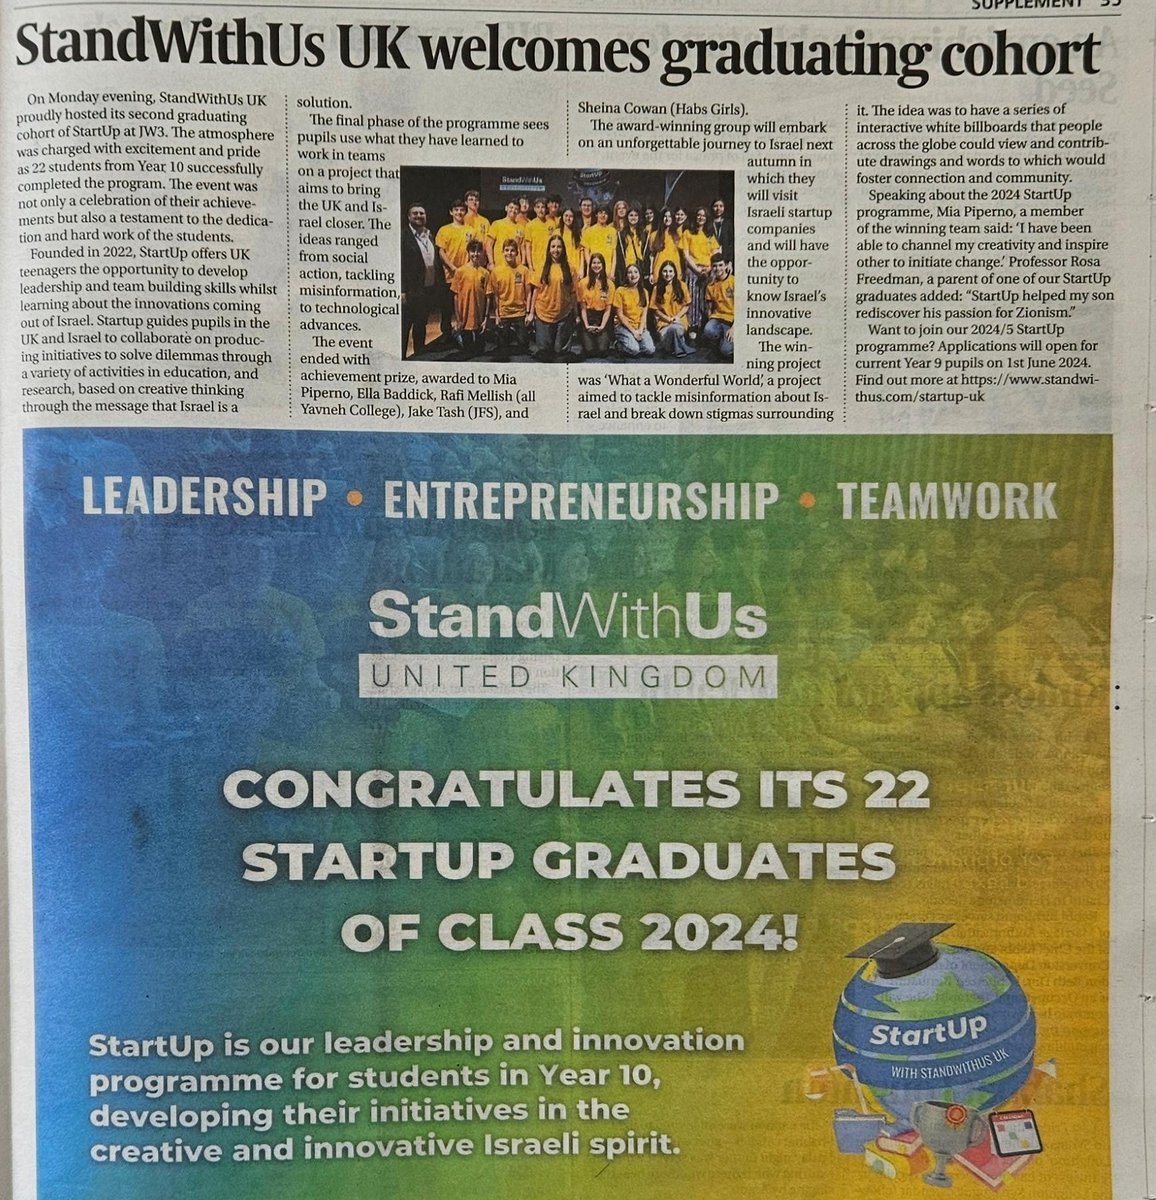 StartUp in the news in the Jewish Weekly! Congratulations once again to our class of 2024! #StartUp2024 @TheJewishWeekly